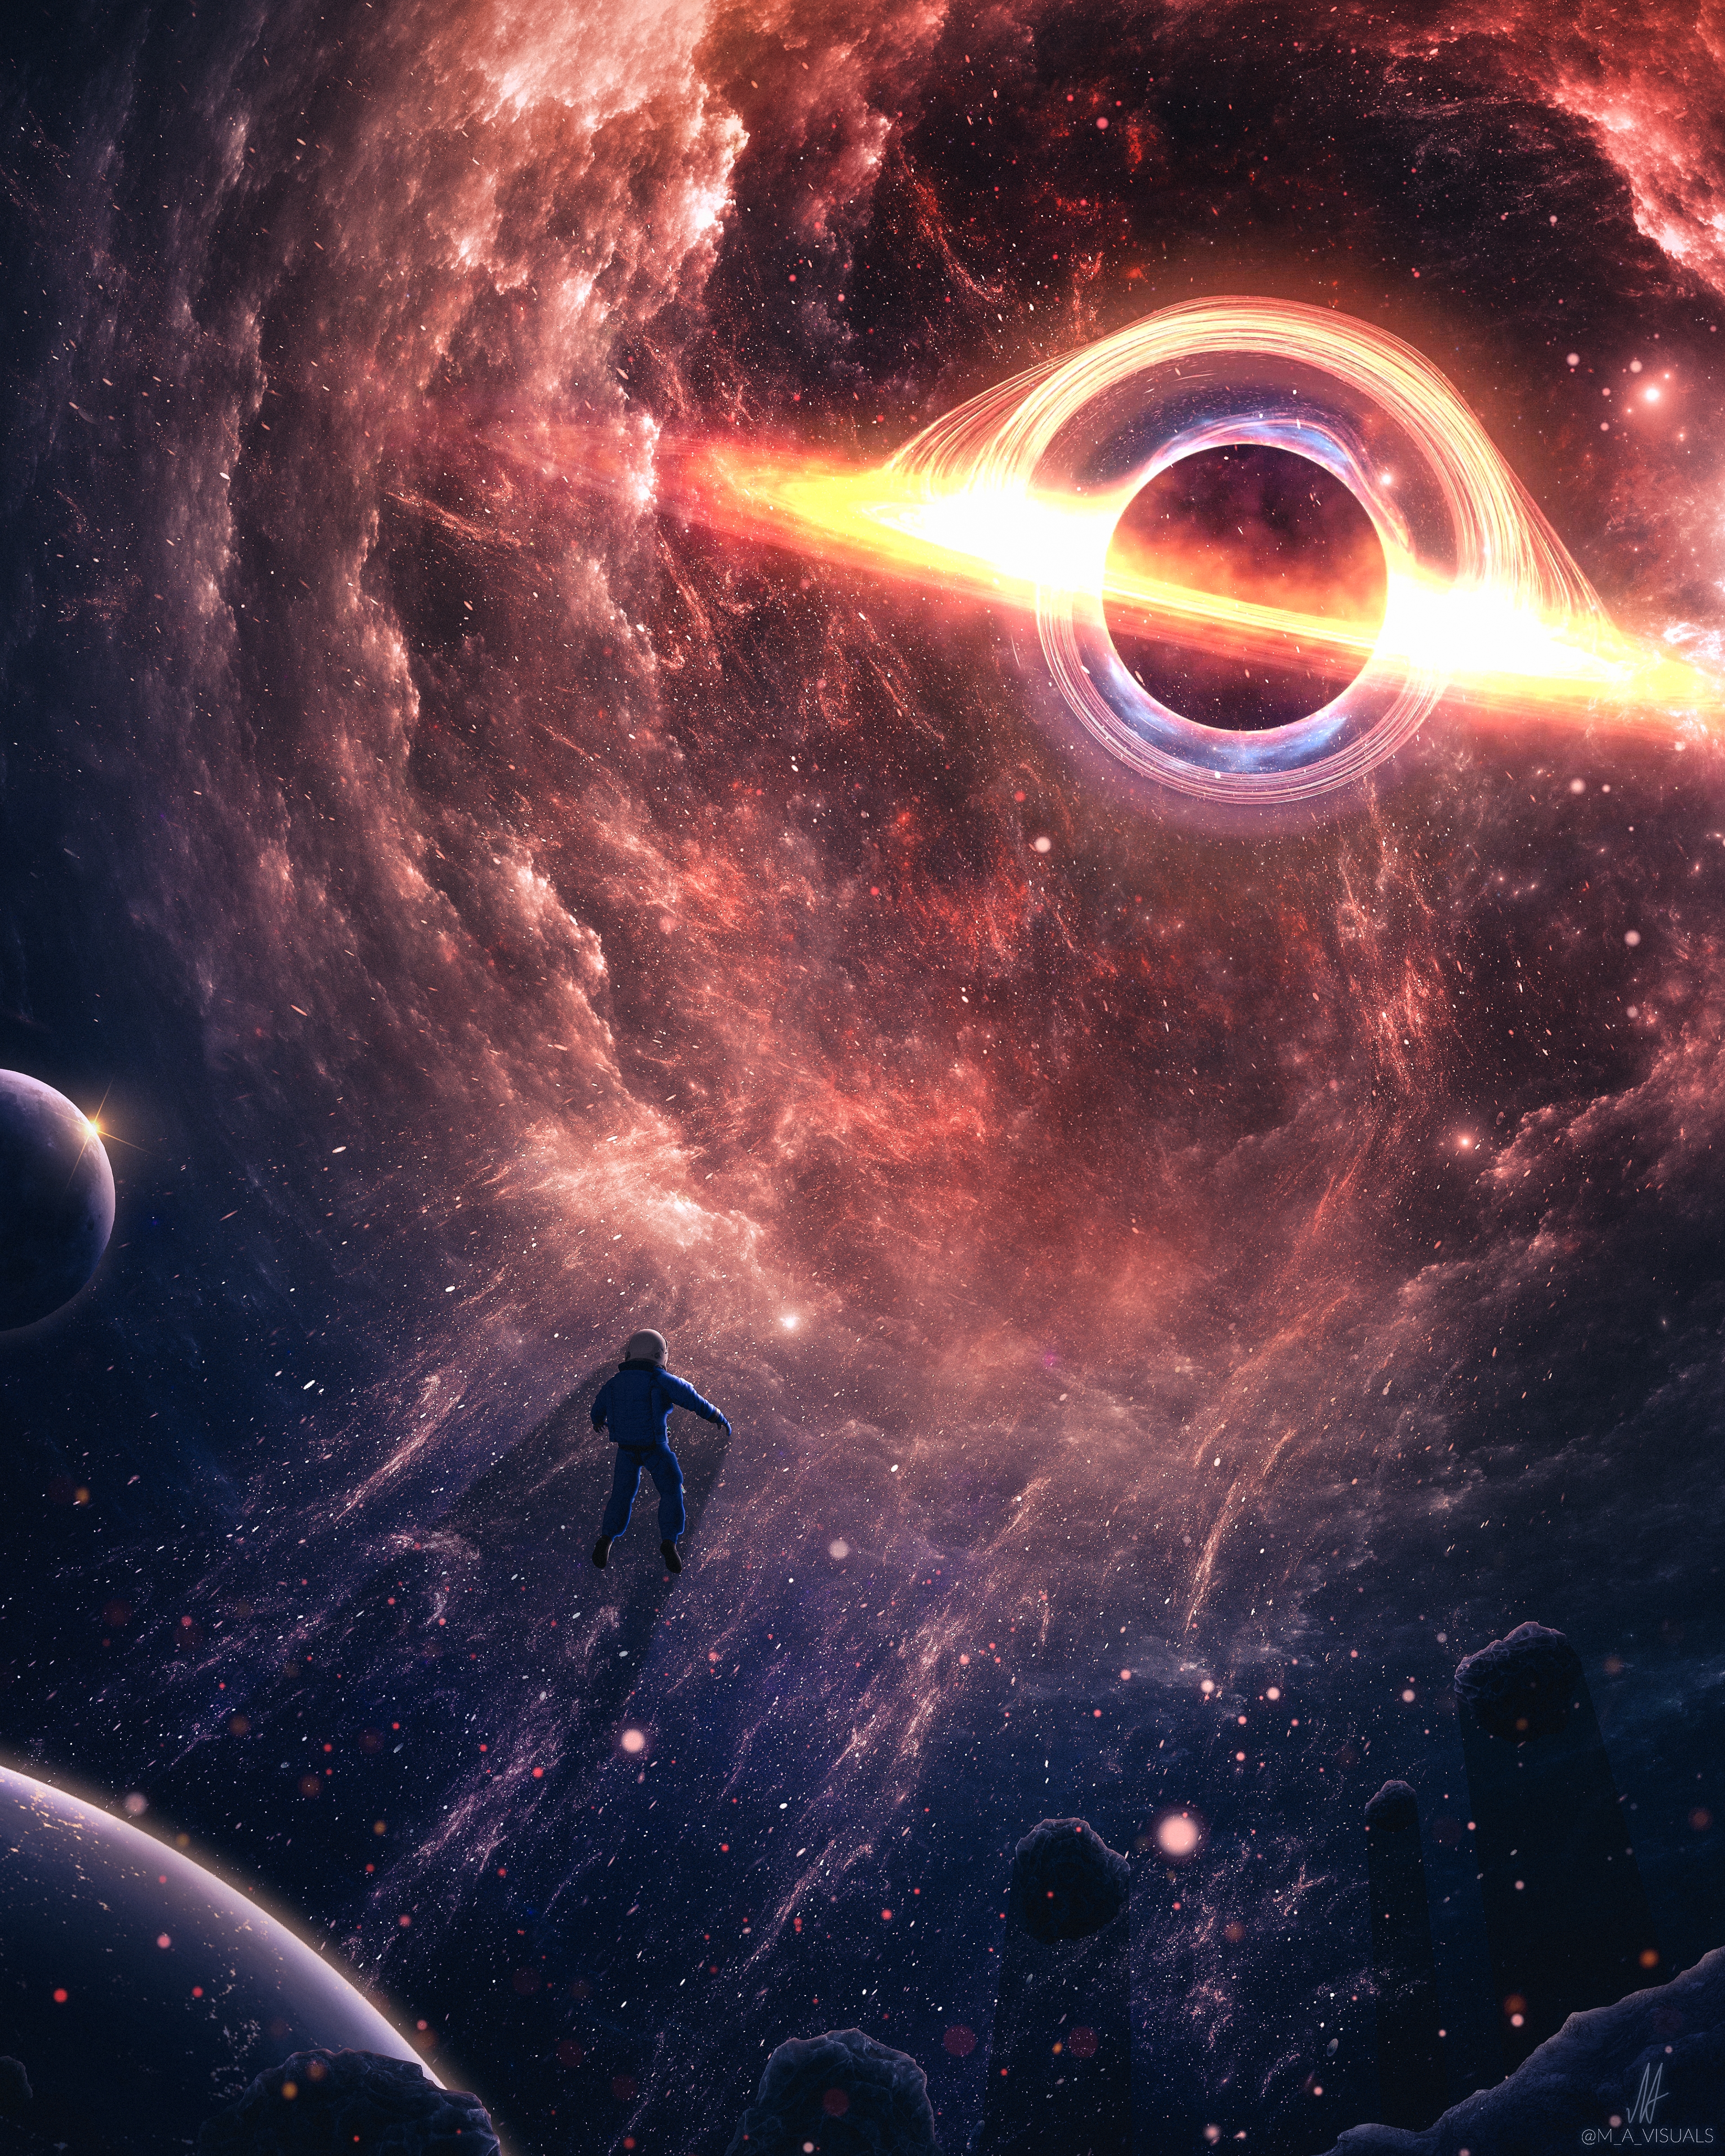 HD wallpaper, Black Hole, Universe, Cosmos, Surreal, Deep Space, Astronaut, Outer Space